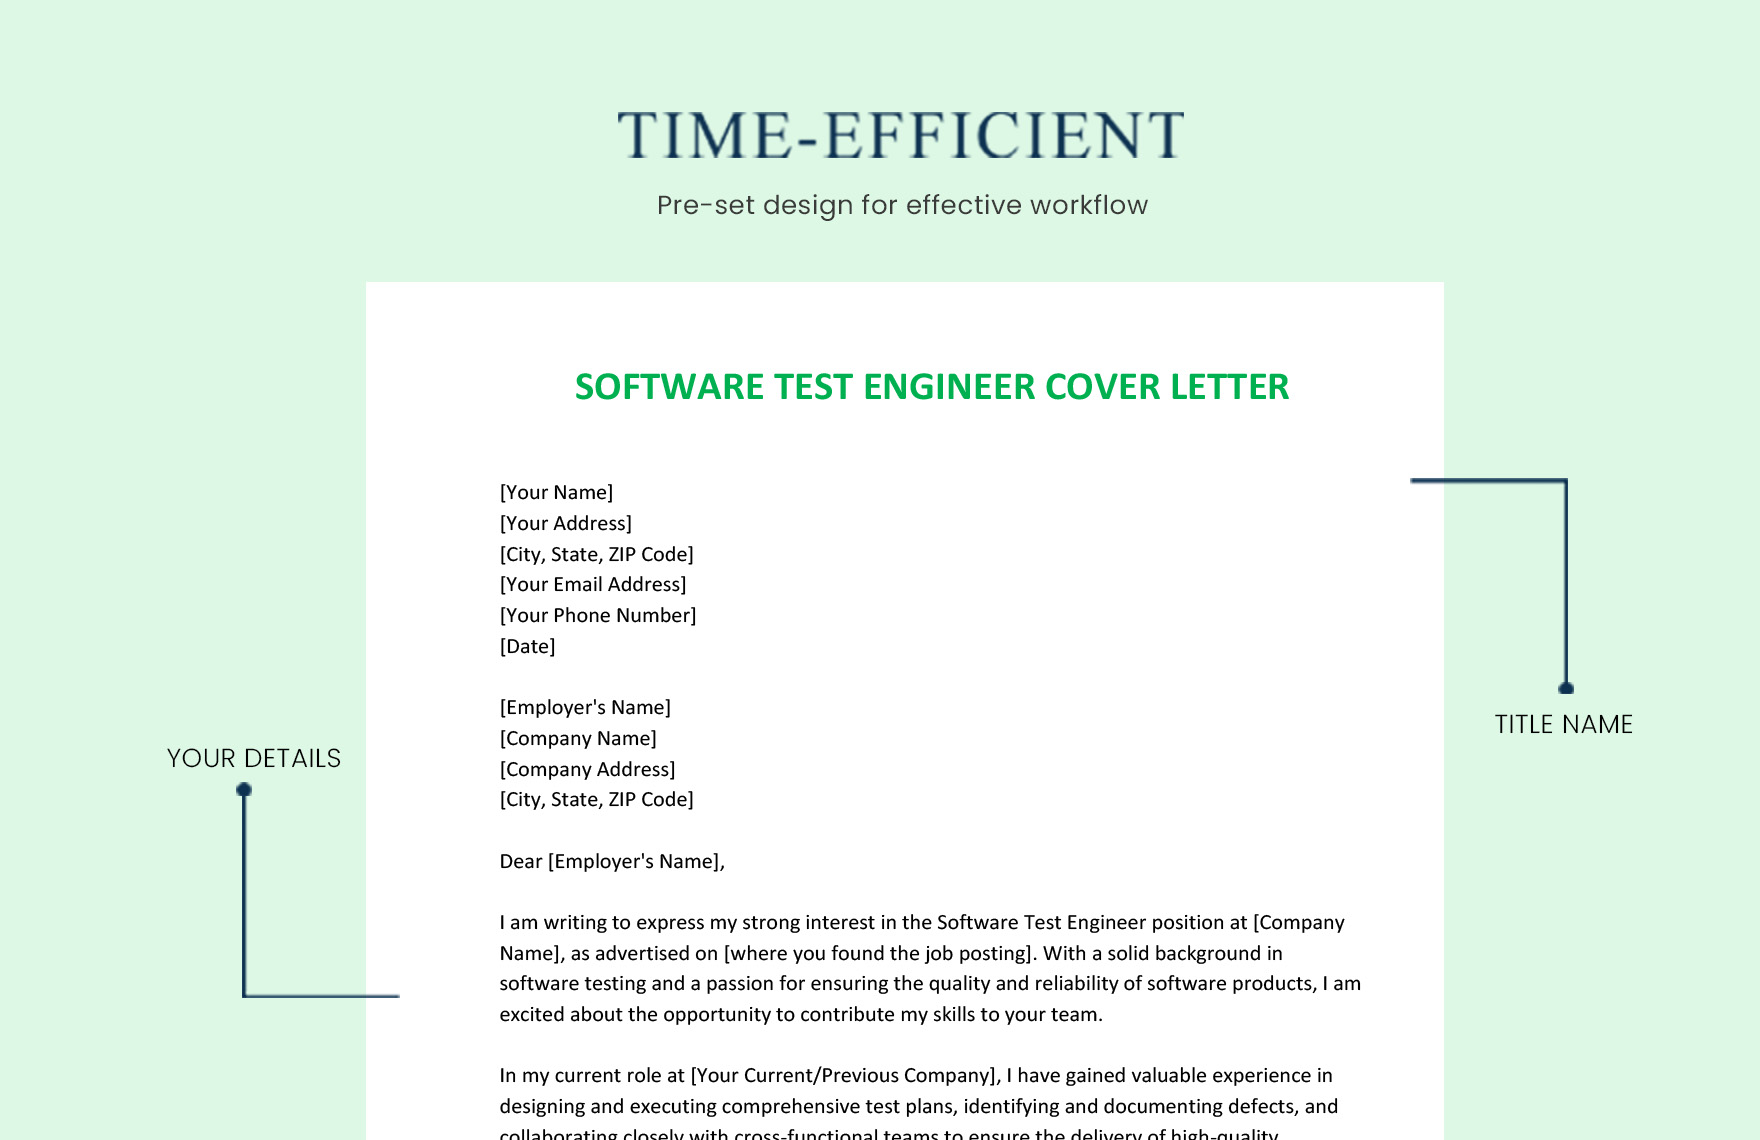 Software Test Engineer Cover Letter